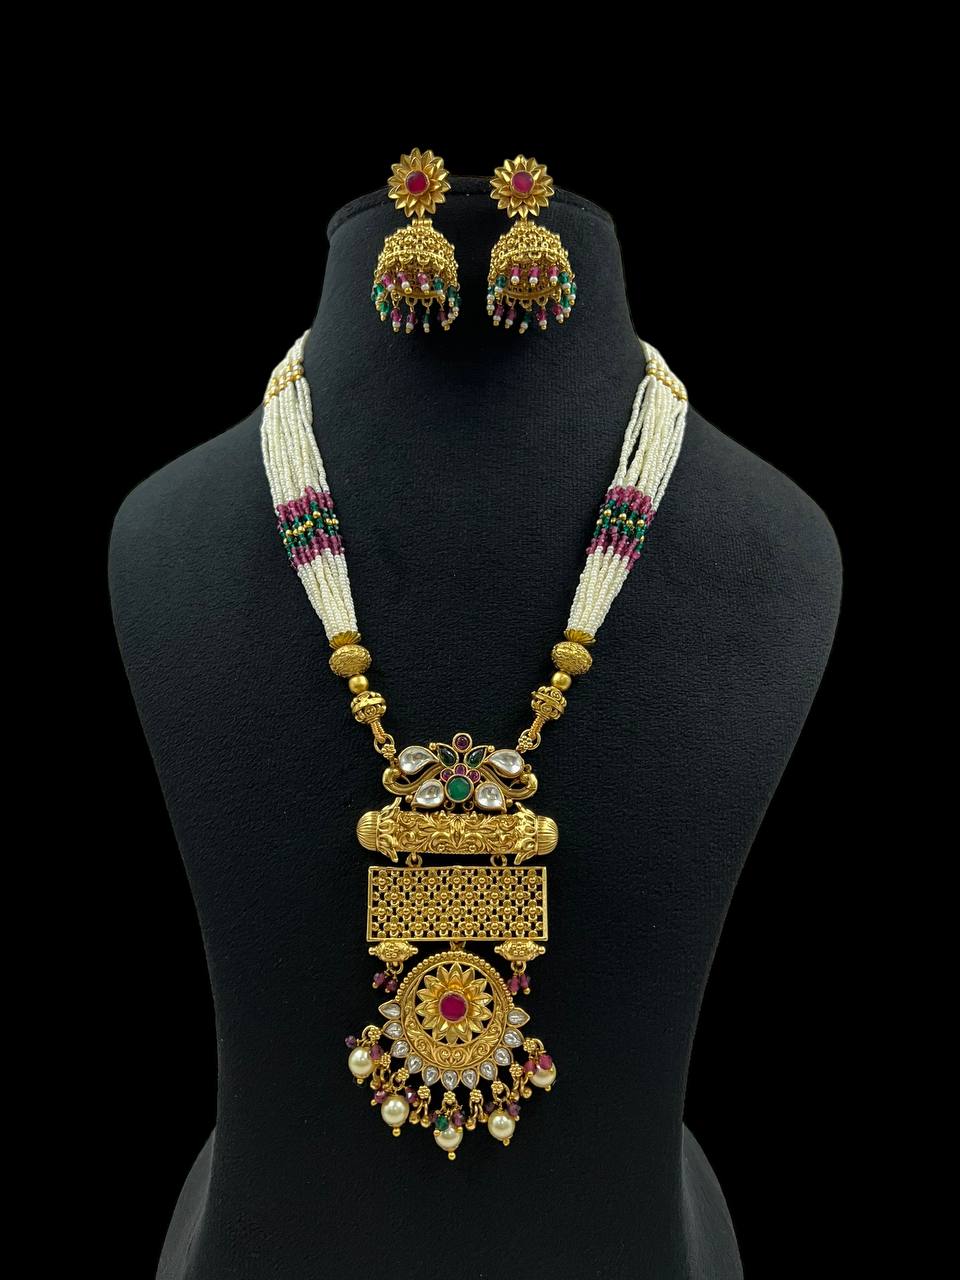 Antique pendant pearls necklace | Indian jewelry in USA